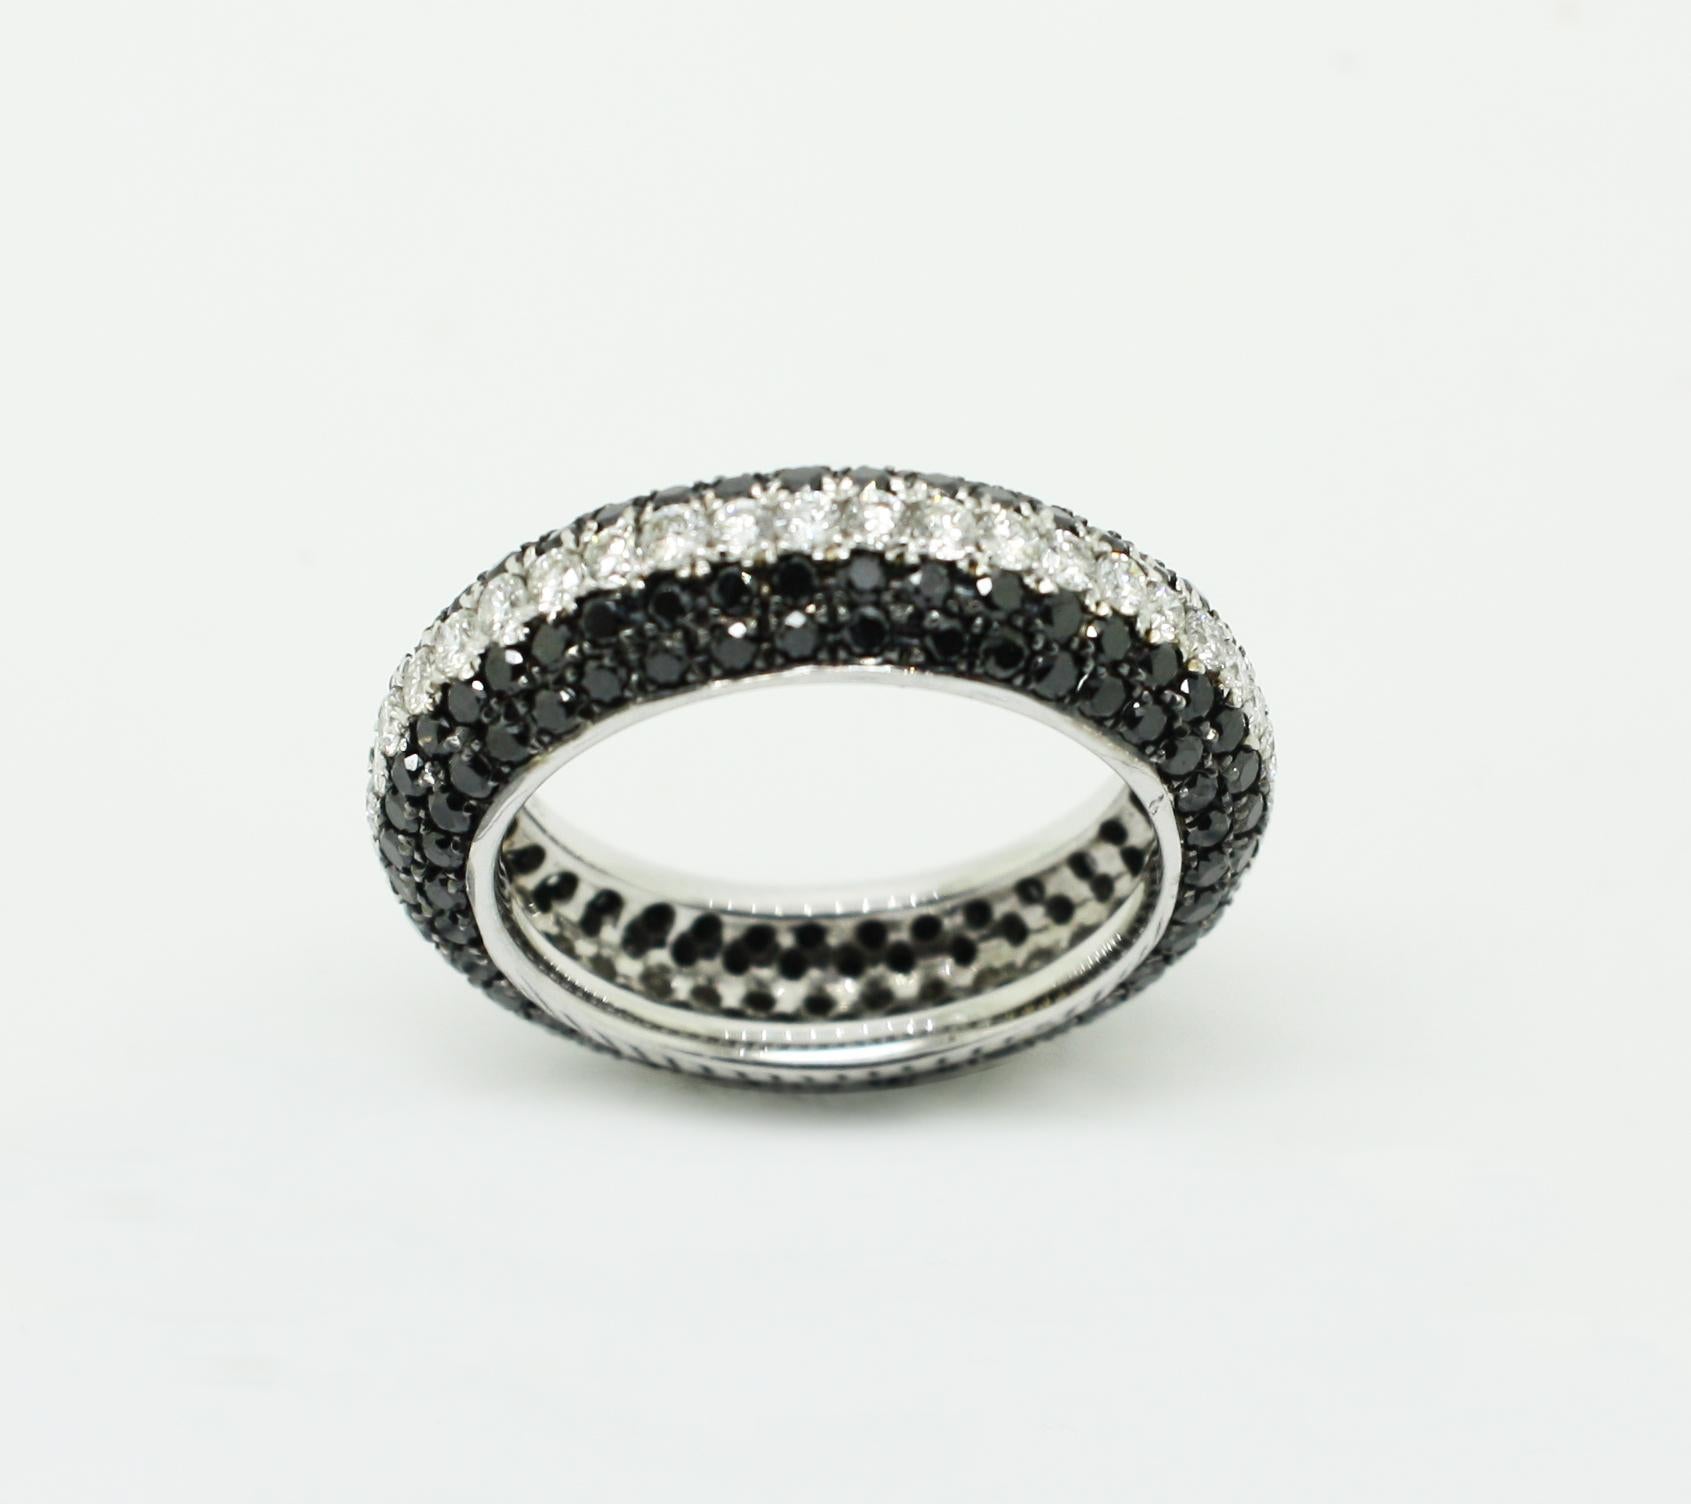 S.Georgios designer 18 Karat White Gold Band with White and Black Diamond Ring is all handmade in a unique two-tone look. The gorgeous band features brilliant cut white diamonds total weight of 0.78 Carat, and black diamonds total weight of 1.10